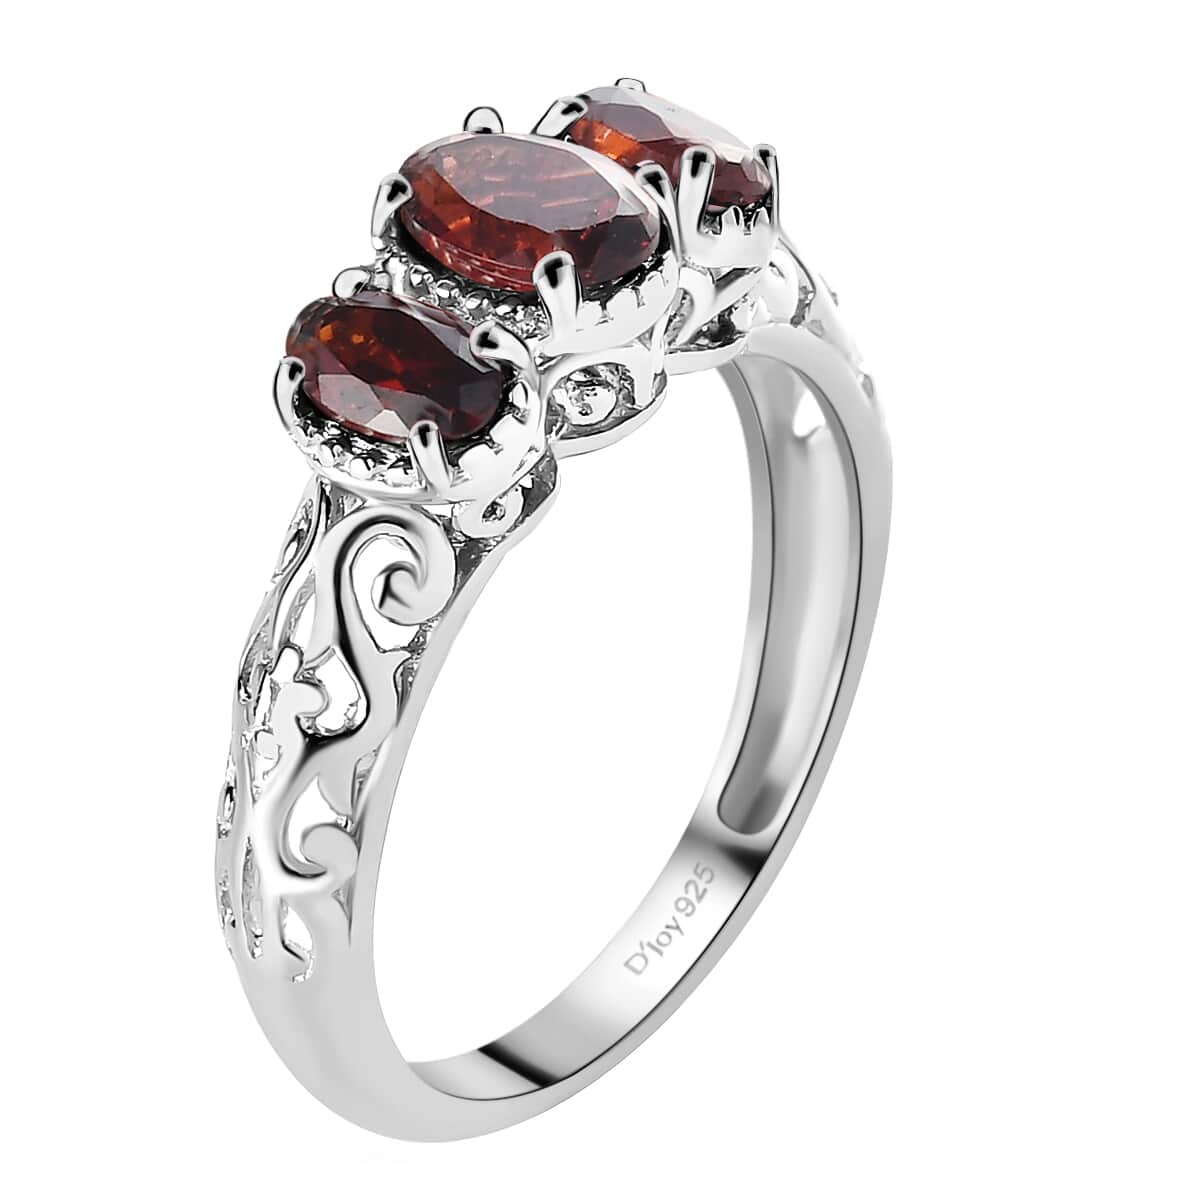 Garnet Ring, 3 Stone Garnet Ring, Trilogy Ring, Sterling Silver Ring, Birthstone Jewelry, Mozambique Garnet 3 Stone Ring 1.15 ctw (Size 7.0) image number 6